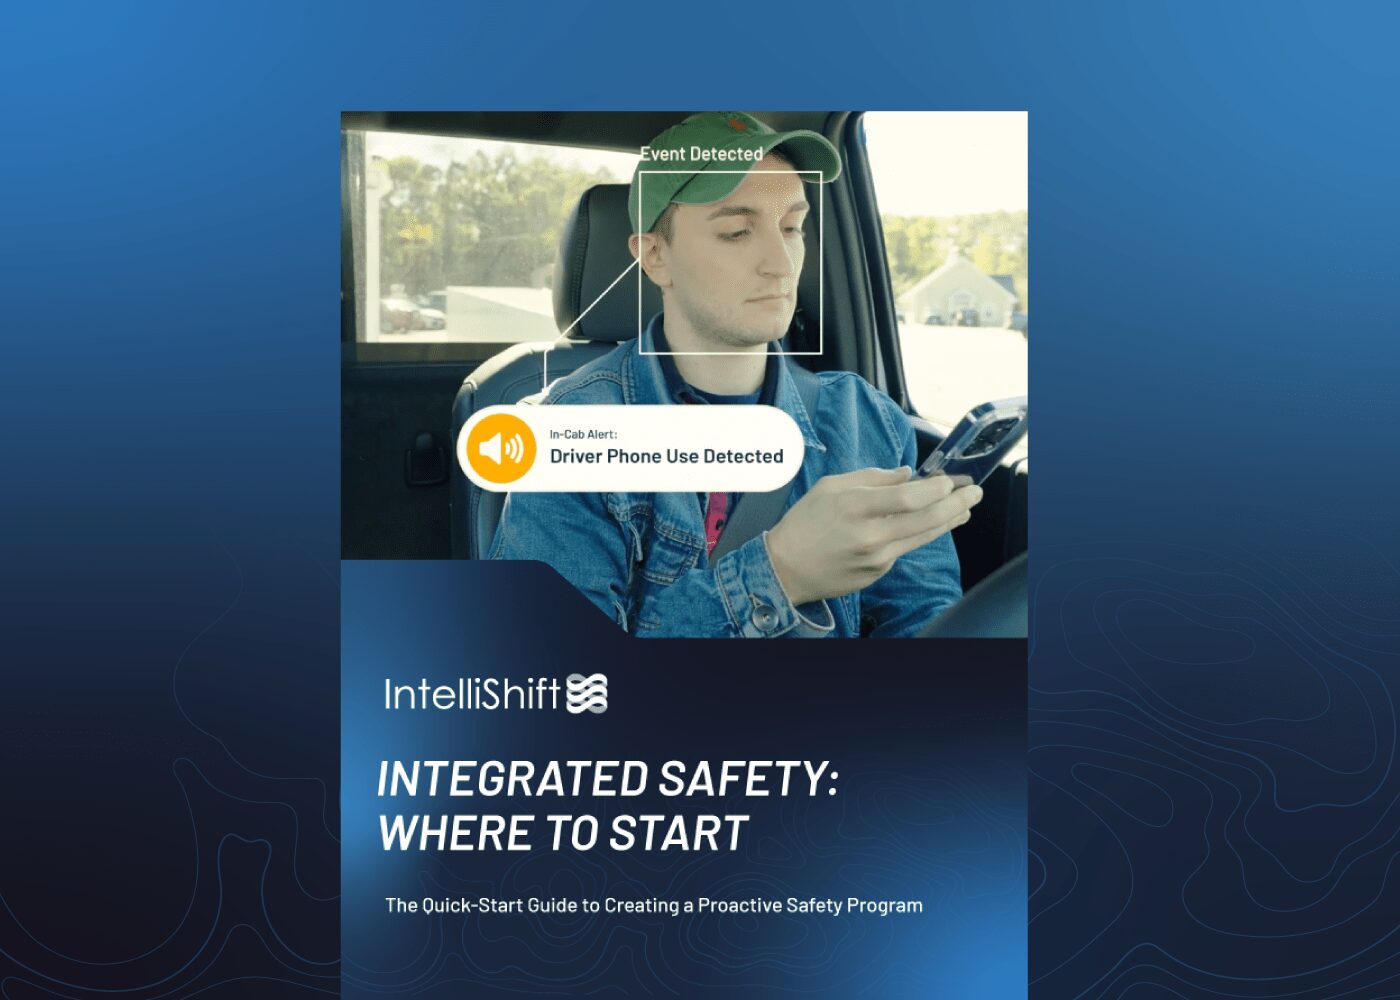 Quick-Start Guide to Creating an Integrated Safety Program